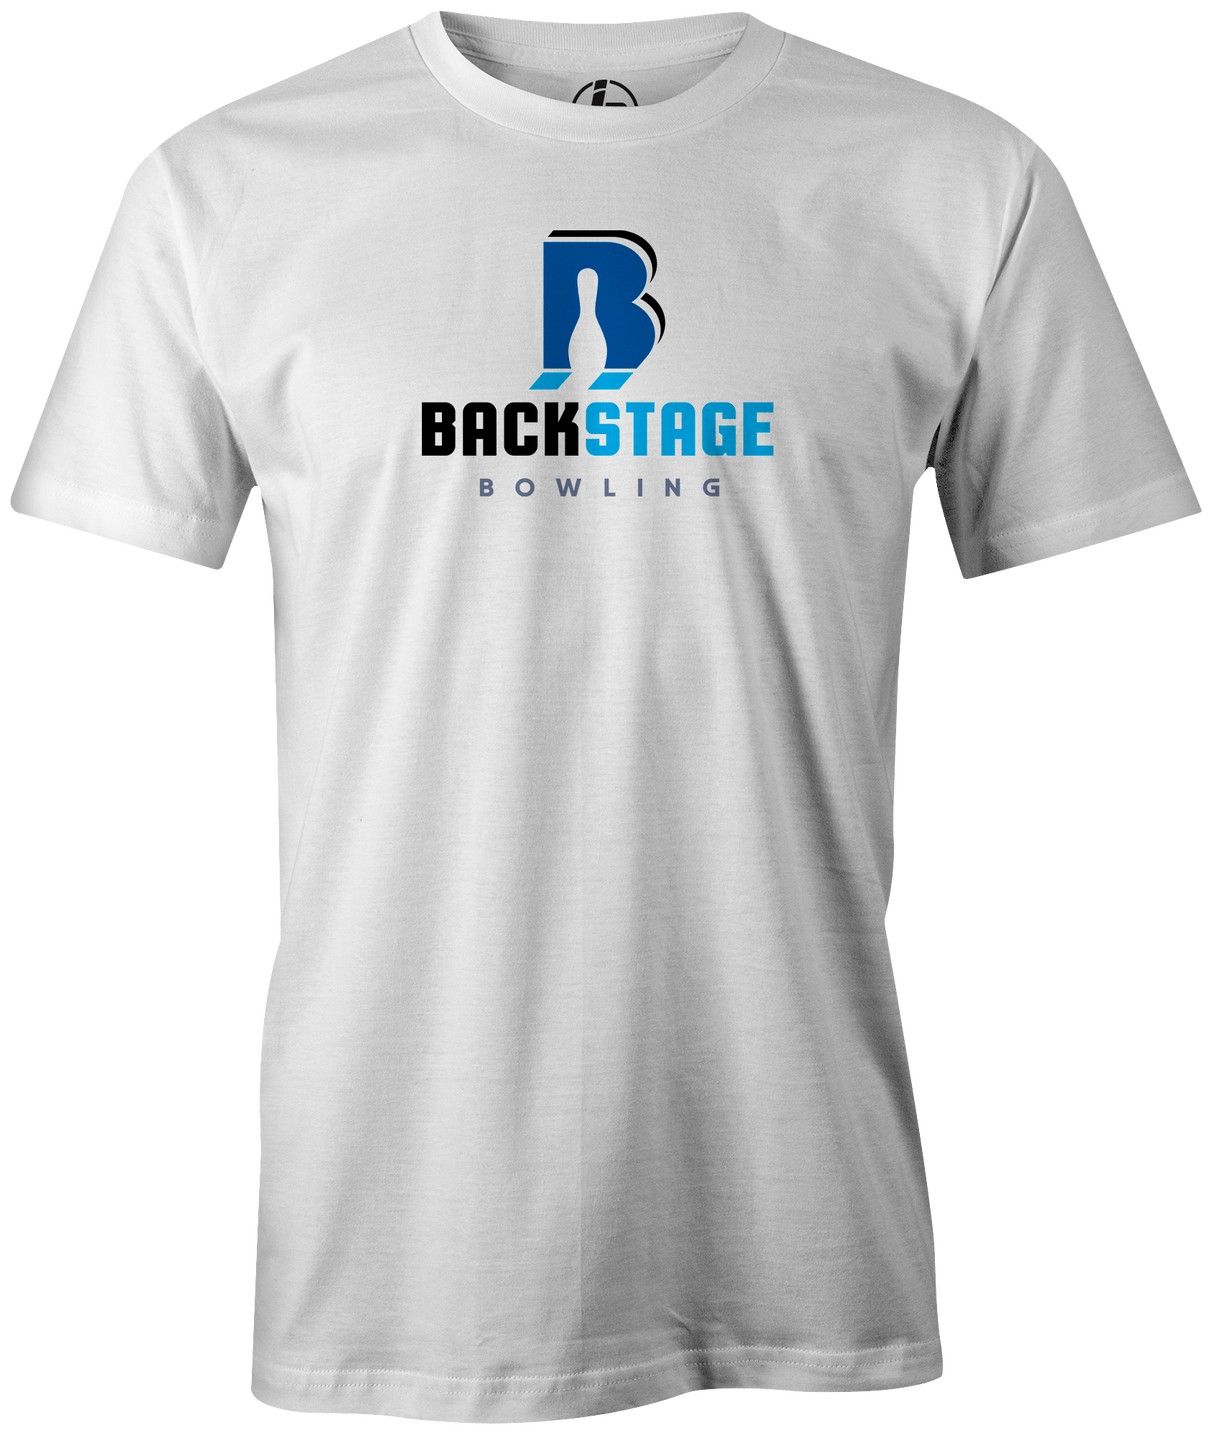 Backstage Bowling Classic T-shirt, men's, white tee, tee-shirt, t shirt, apparel, merch, practice, lanes, free shipping, discount, cheap, coupon, shannon o'keefe, bryan o'keefe, mike jasnau, mike shady, coaching, membership, cool, vintage, authentic, original